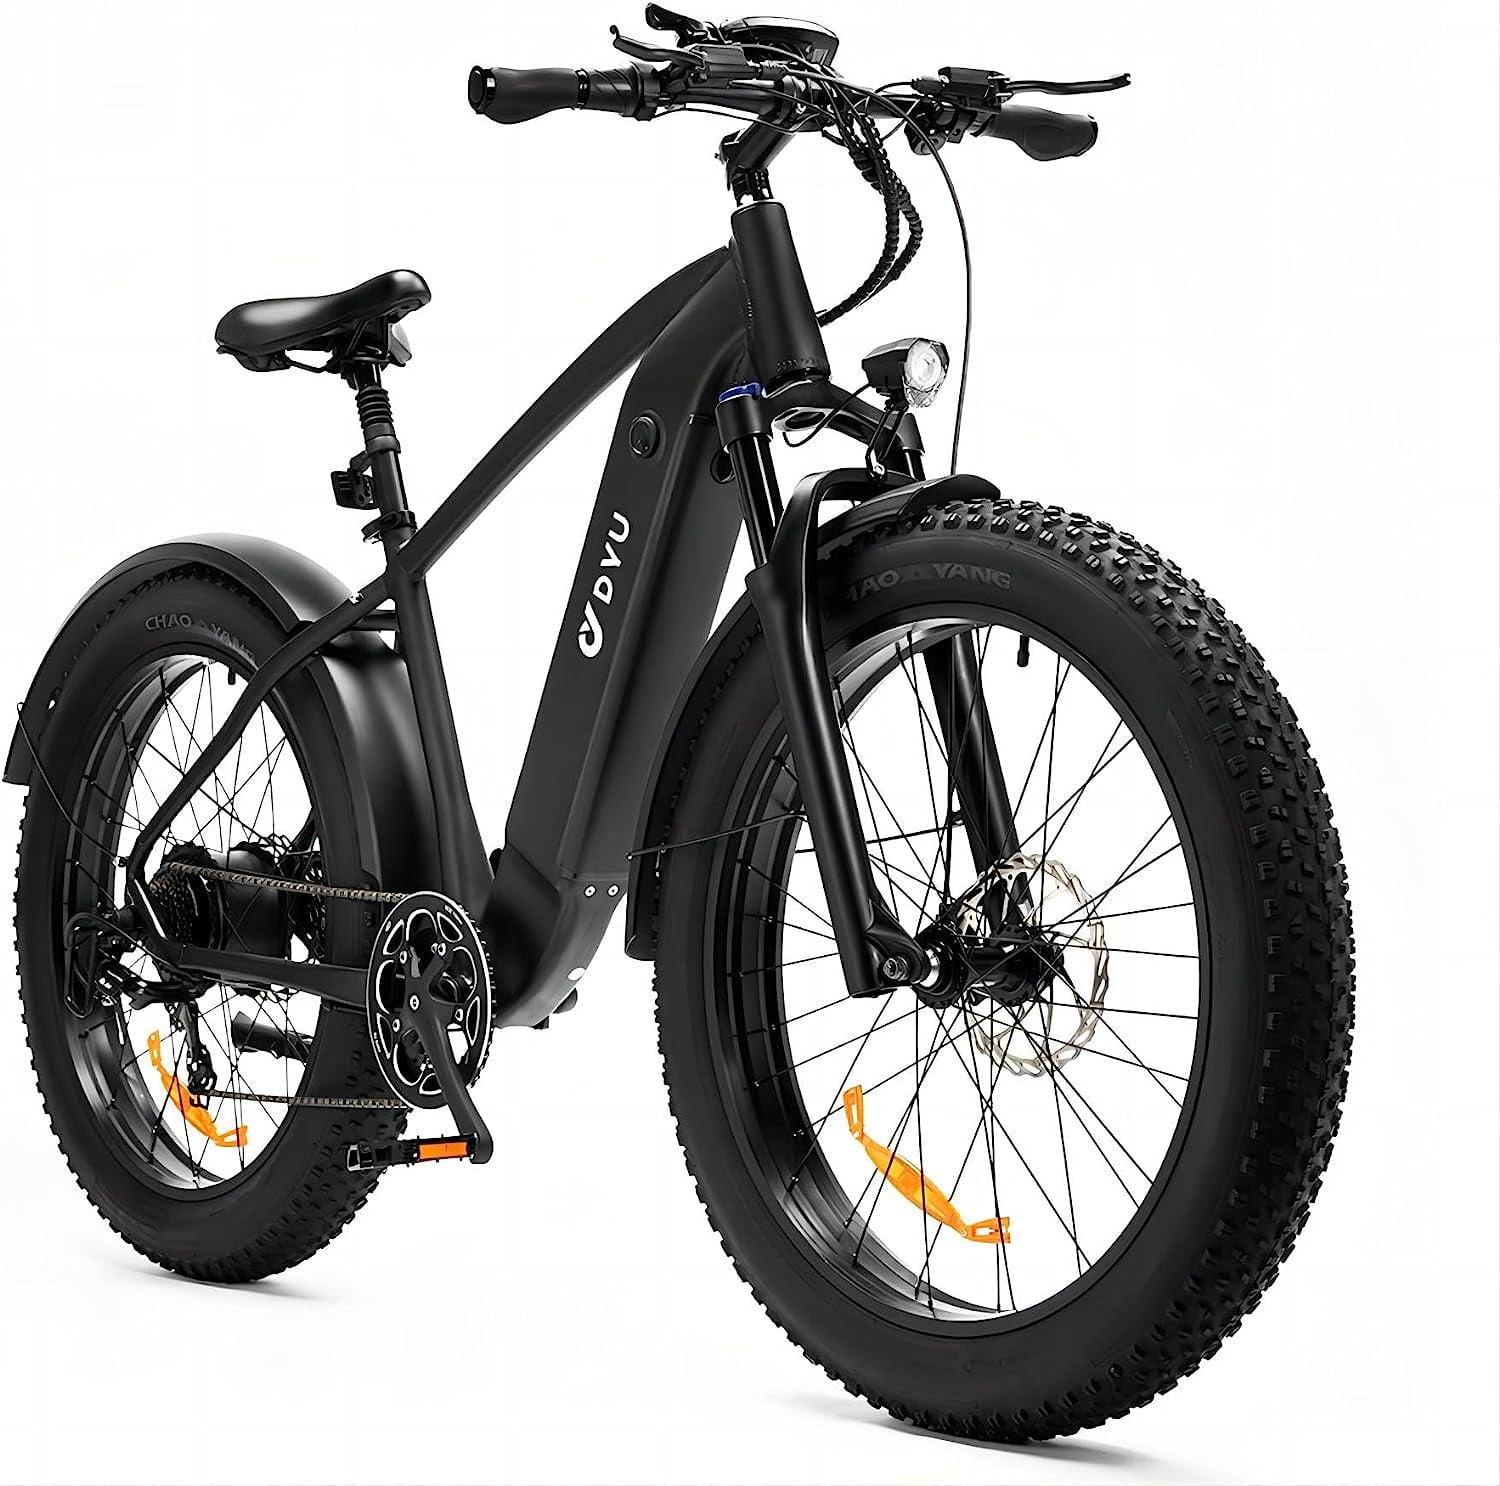 DYU 26" 4.0 Fat Tire Electric Bike for Adults, 750W 48V 20AH, 1100Wh LG Battery, Air Saddle, Shimano 7-Speed Gear, Dual Shock Absorber Mountain Ebike, Front&Rear Fenders, Complies to UL2849